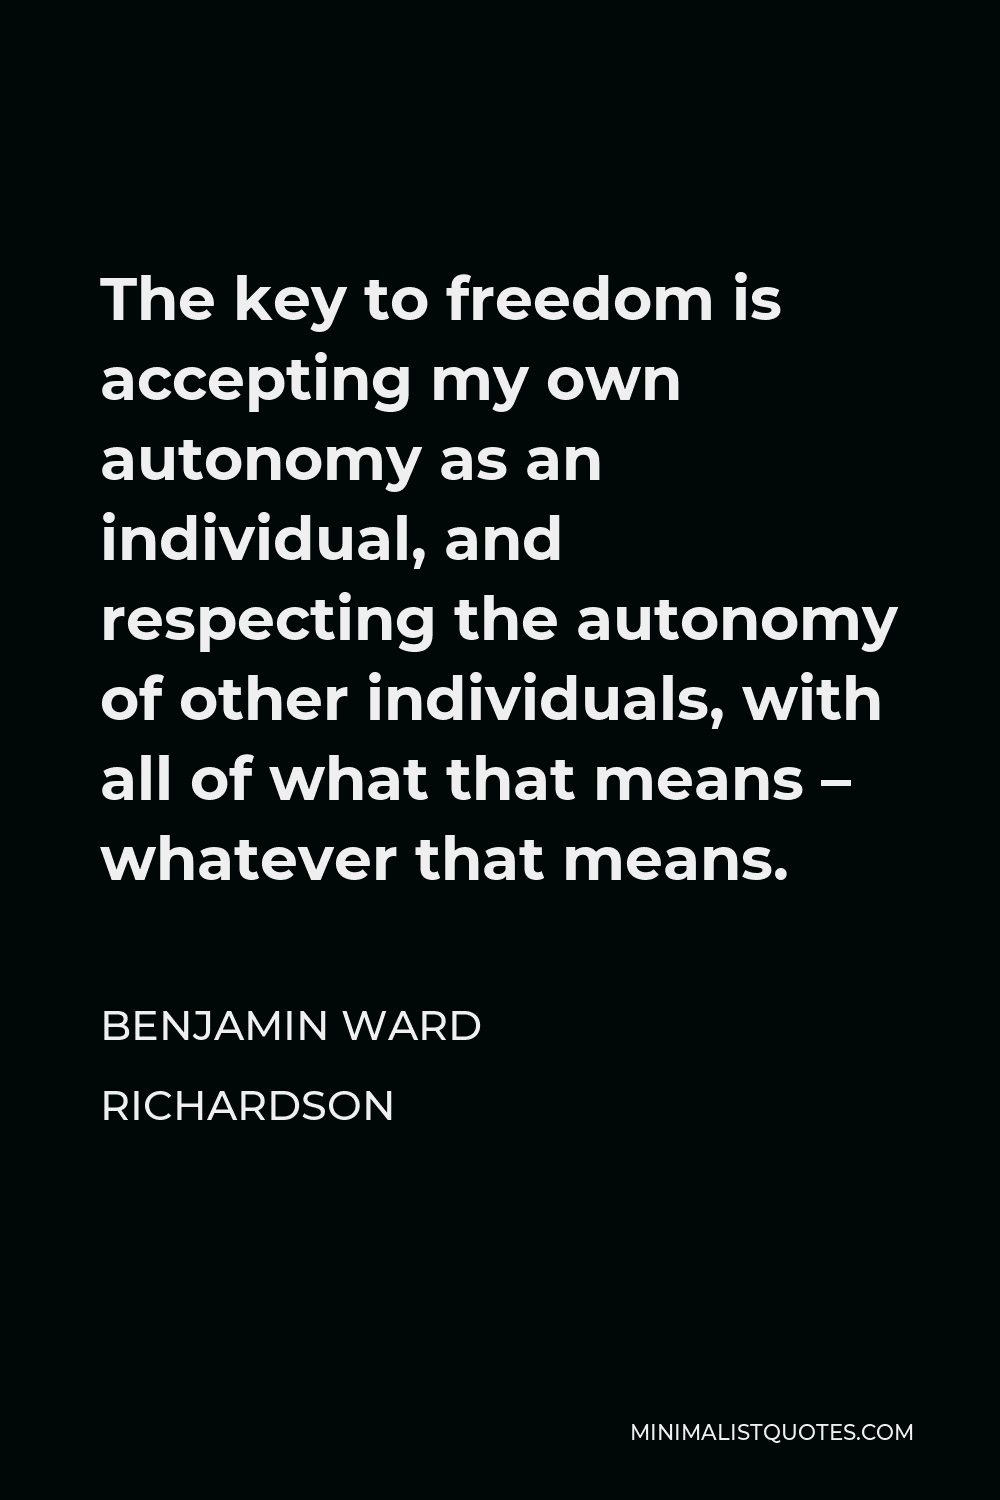 Benjamin Ward Richardson Quote - The key to freedom is accepting my own autonomy as an individual, and respecting the autonomy of other individuals, with all of what that means – whatever that means.